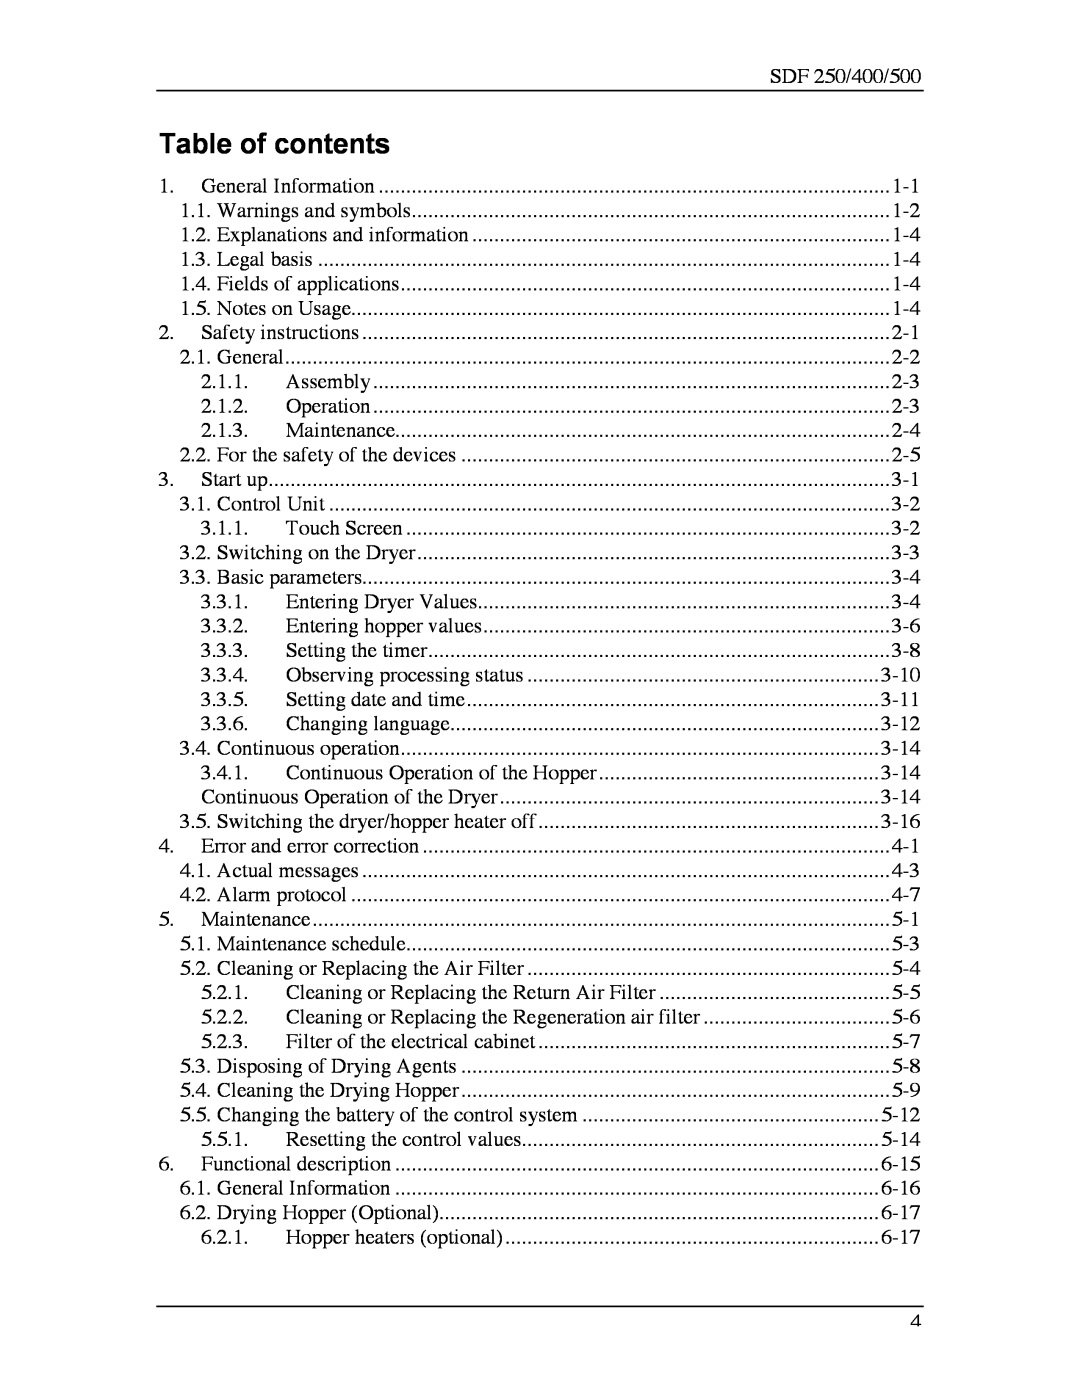 Sterling SDF 250, SDF 400, SDF 500 manual Table of contents 